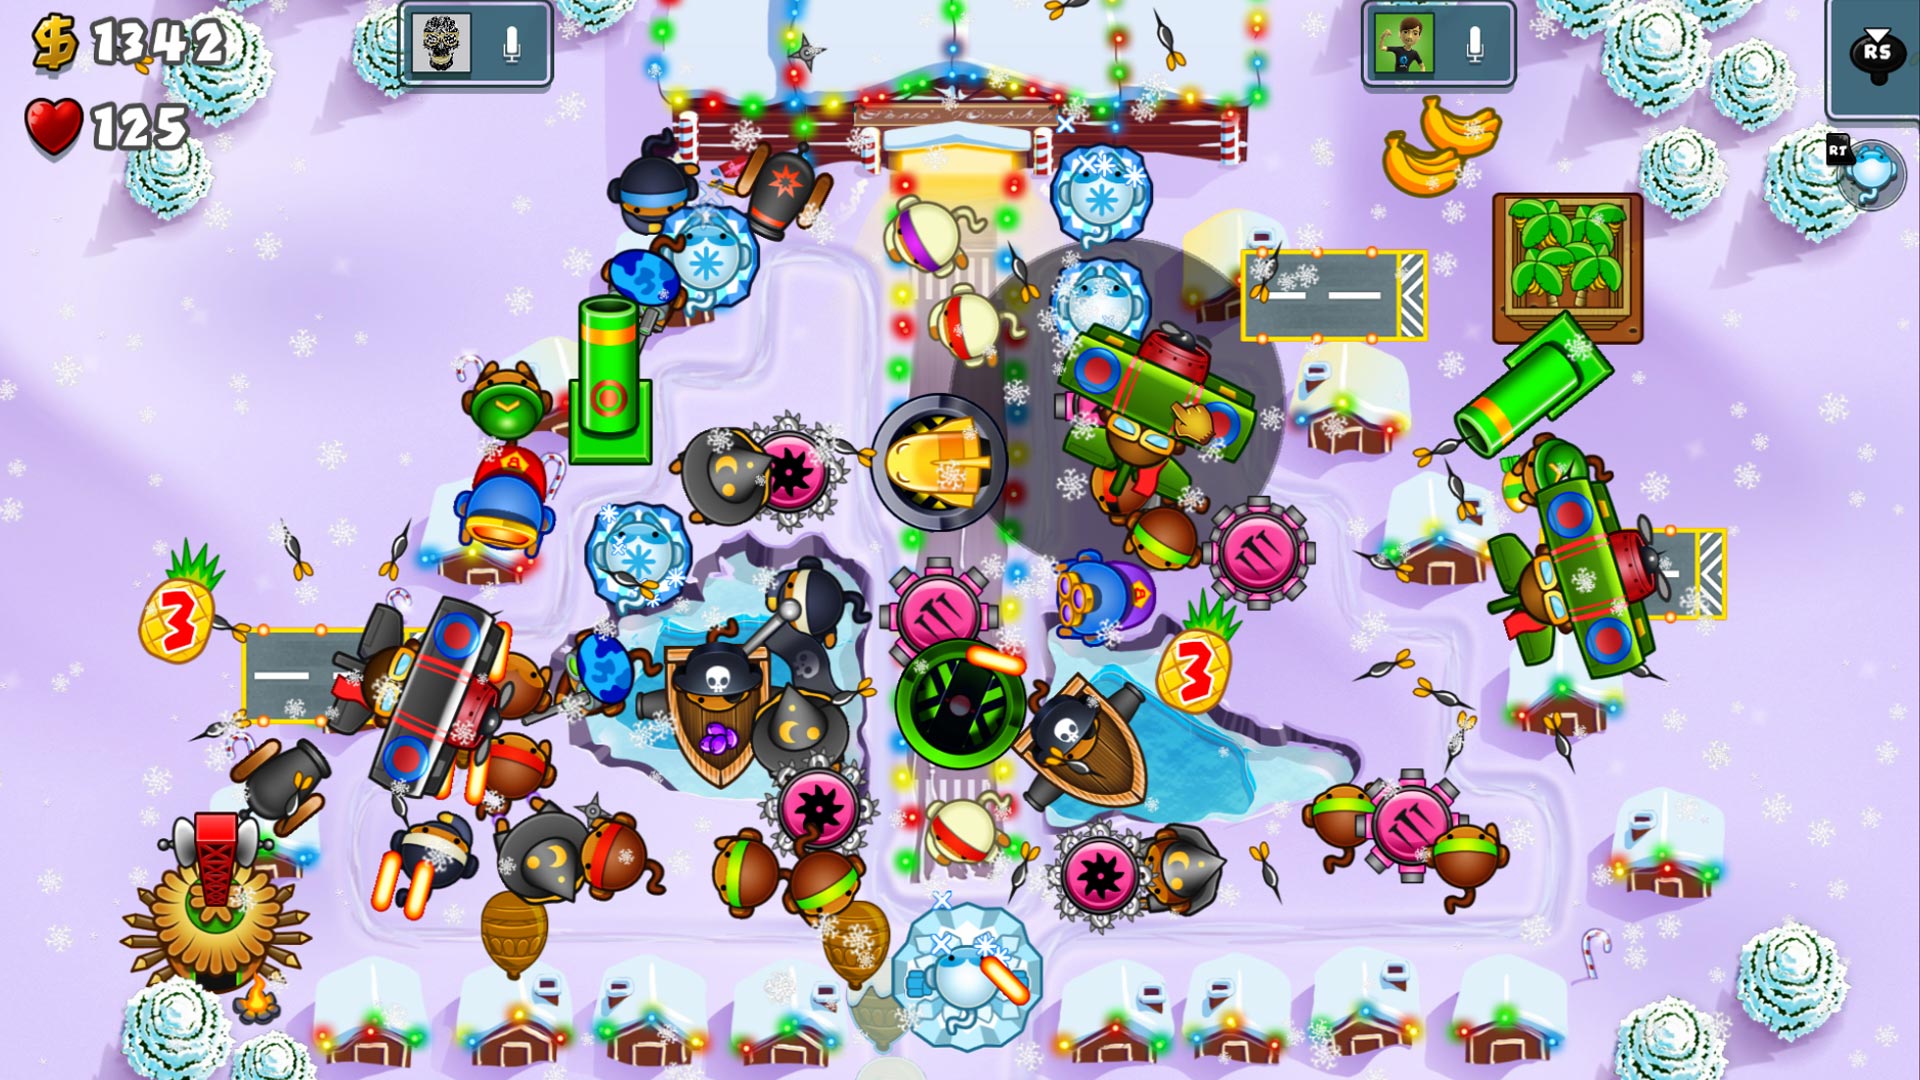 Bloons TD5 Xbox One Screenshot Coop Skycaptin5 and FncWill